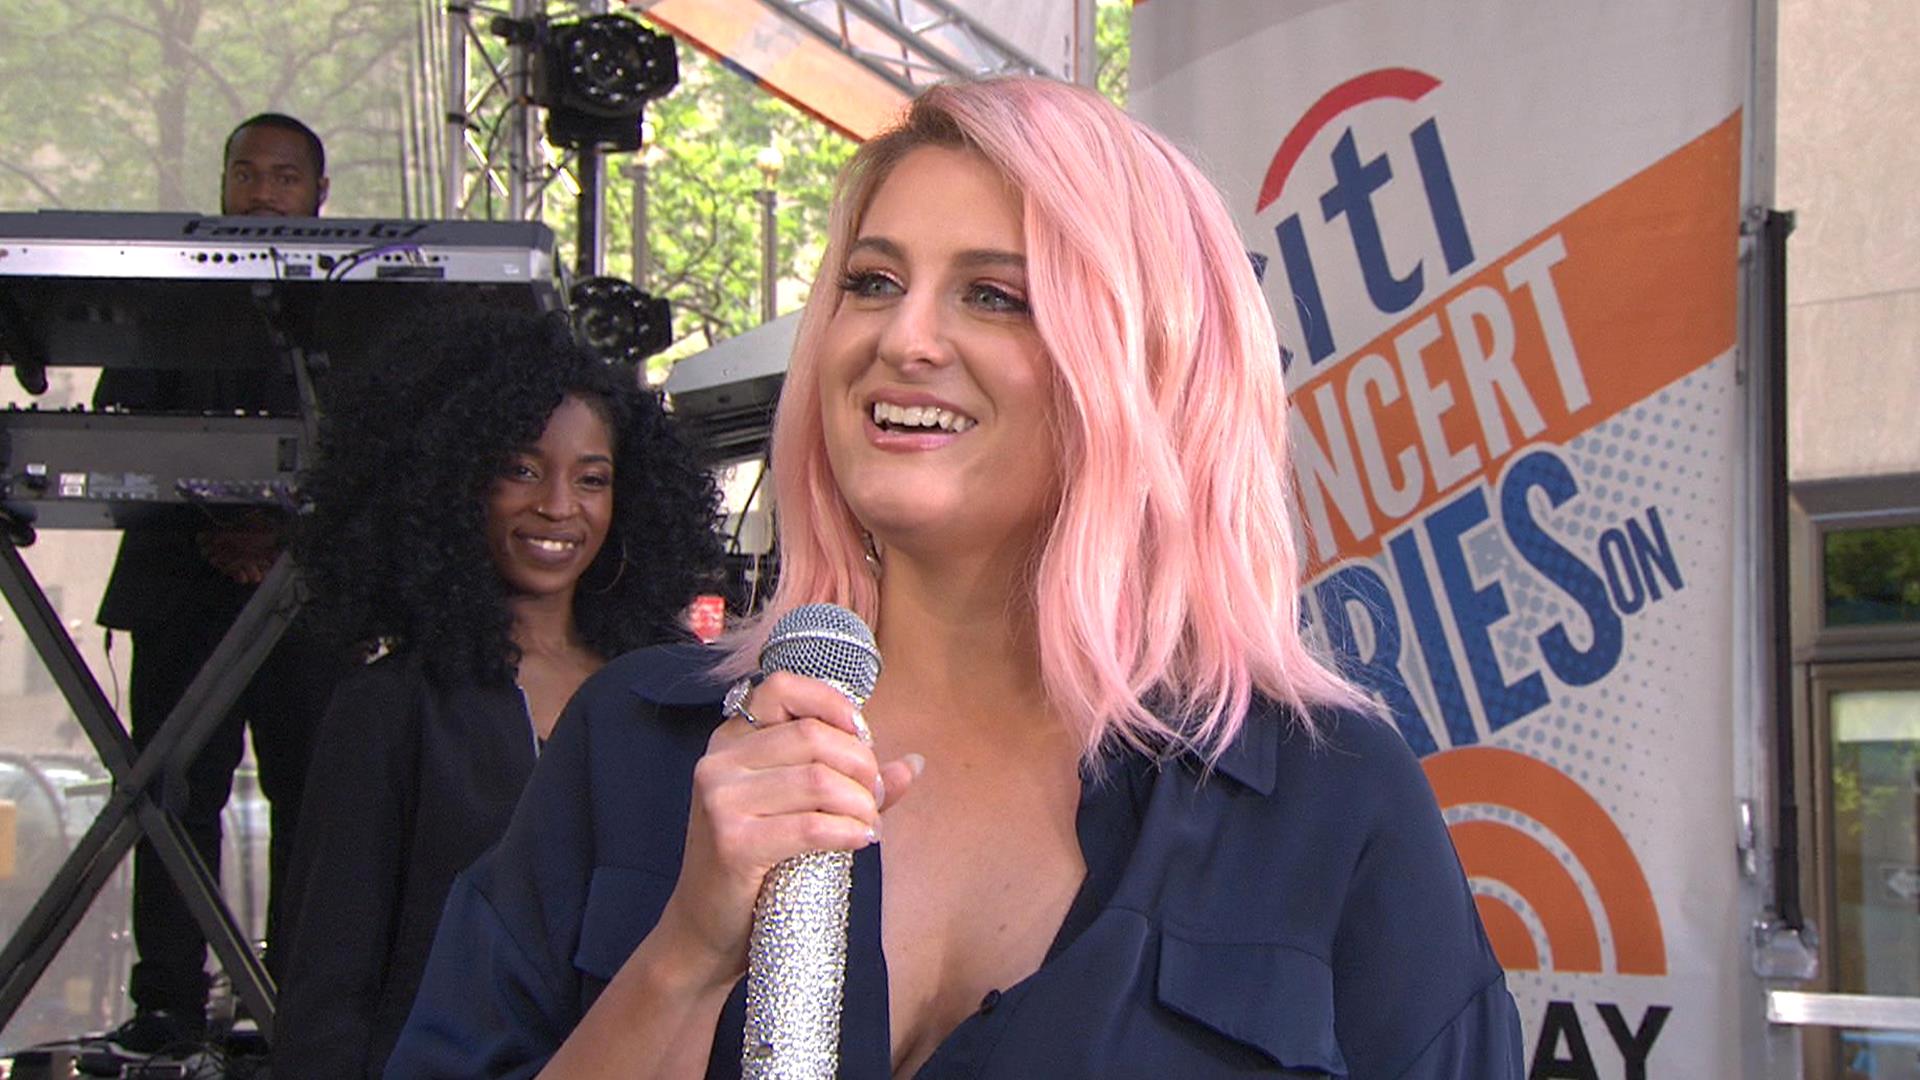 Meghan Trainor on her engagement: ‘I’m locking it down’ - TODAY.com1920 x 1080